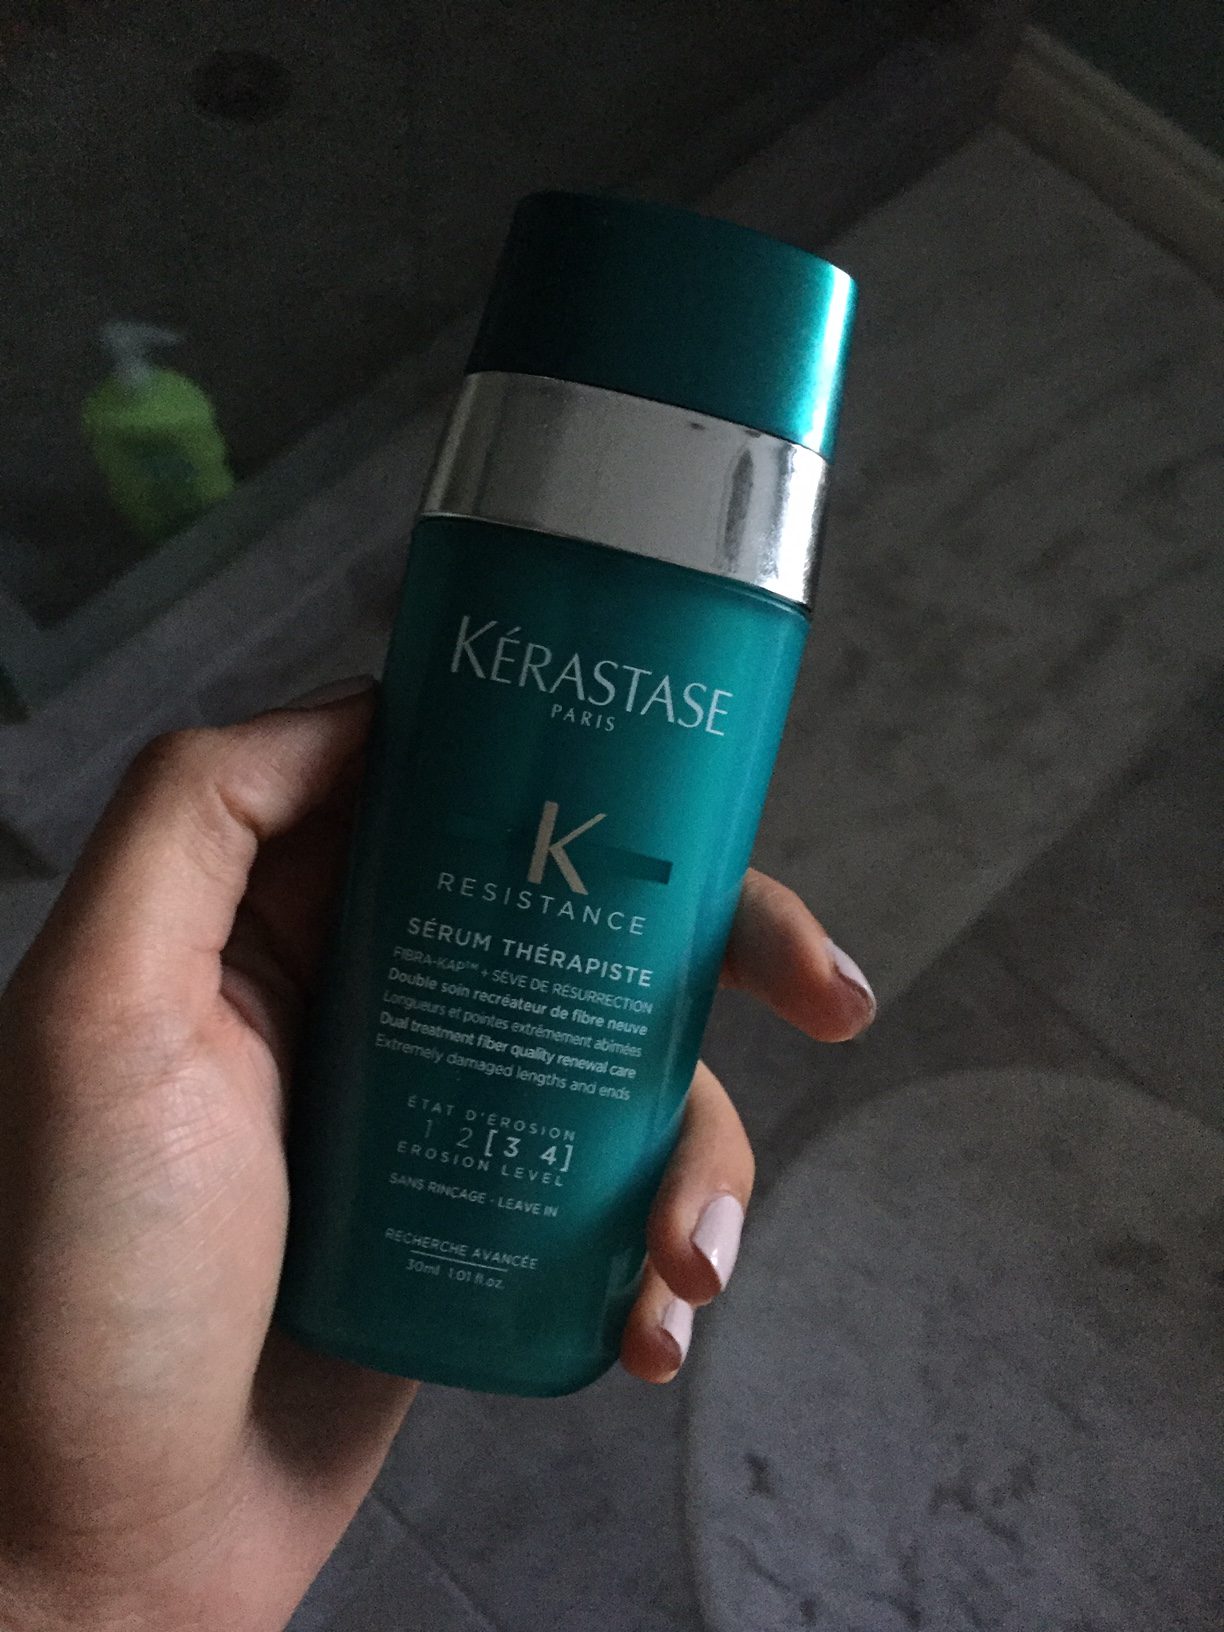 Kerastase Extentioniste Care For Longer Hair And Resistance Serum Therapiste Canadian Beauty